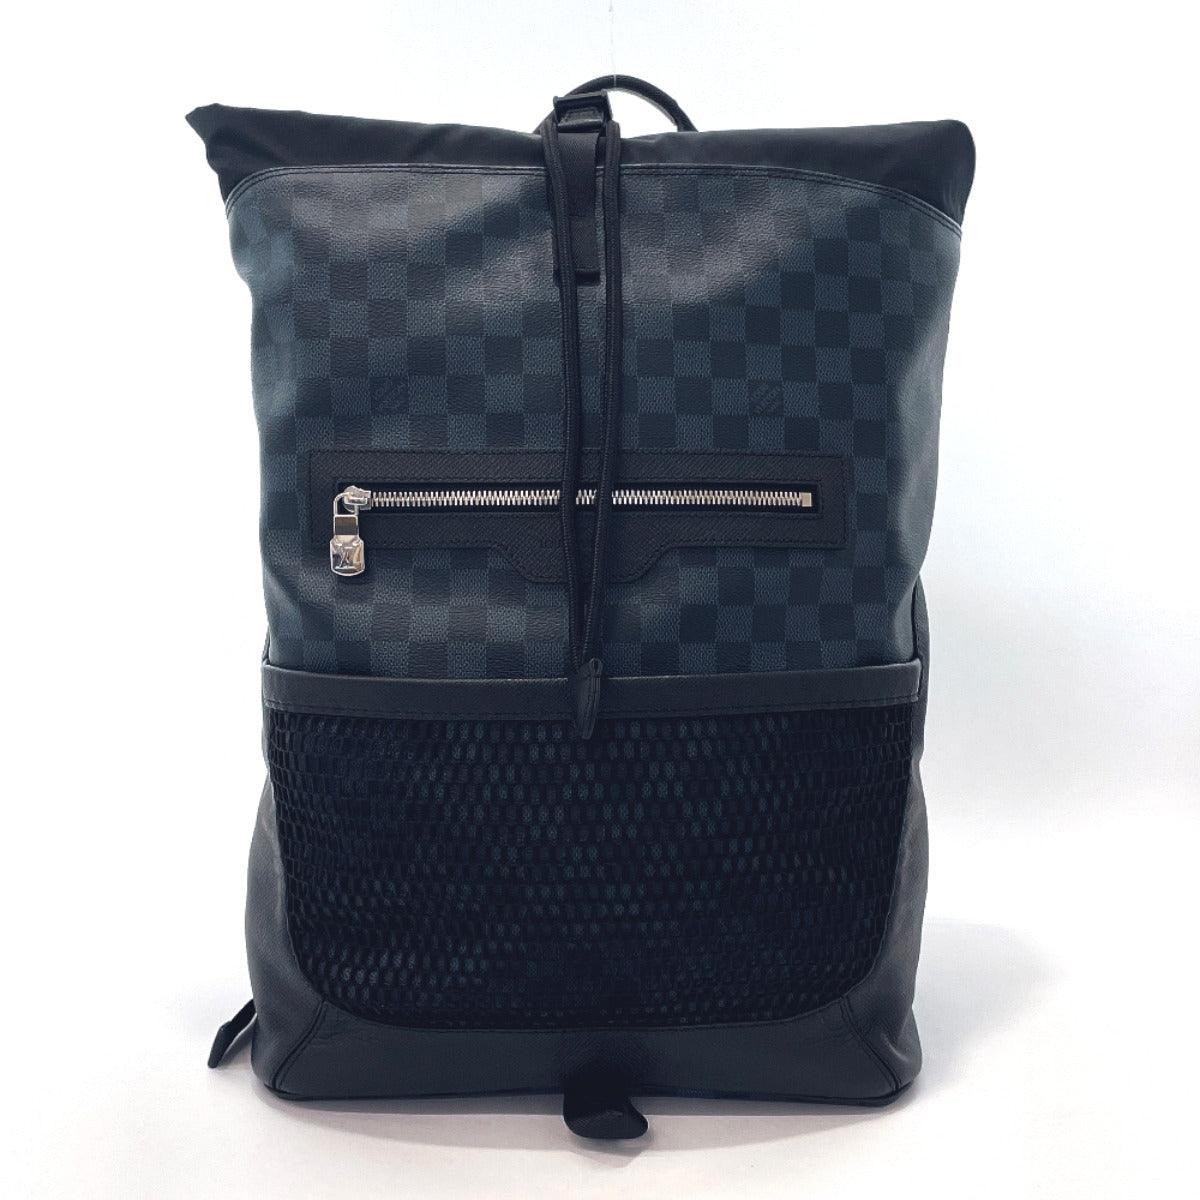 LOUIS VUITTON Backpack Daypack N40009 Match point backpack Damier